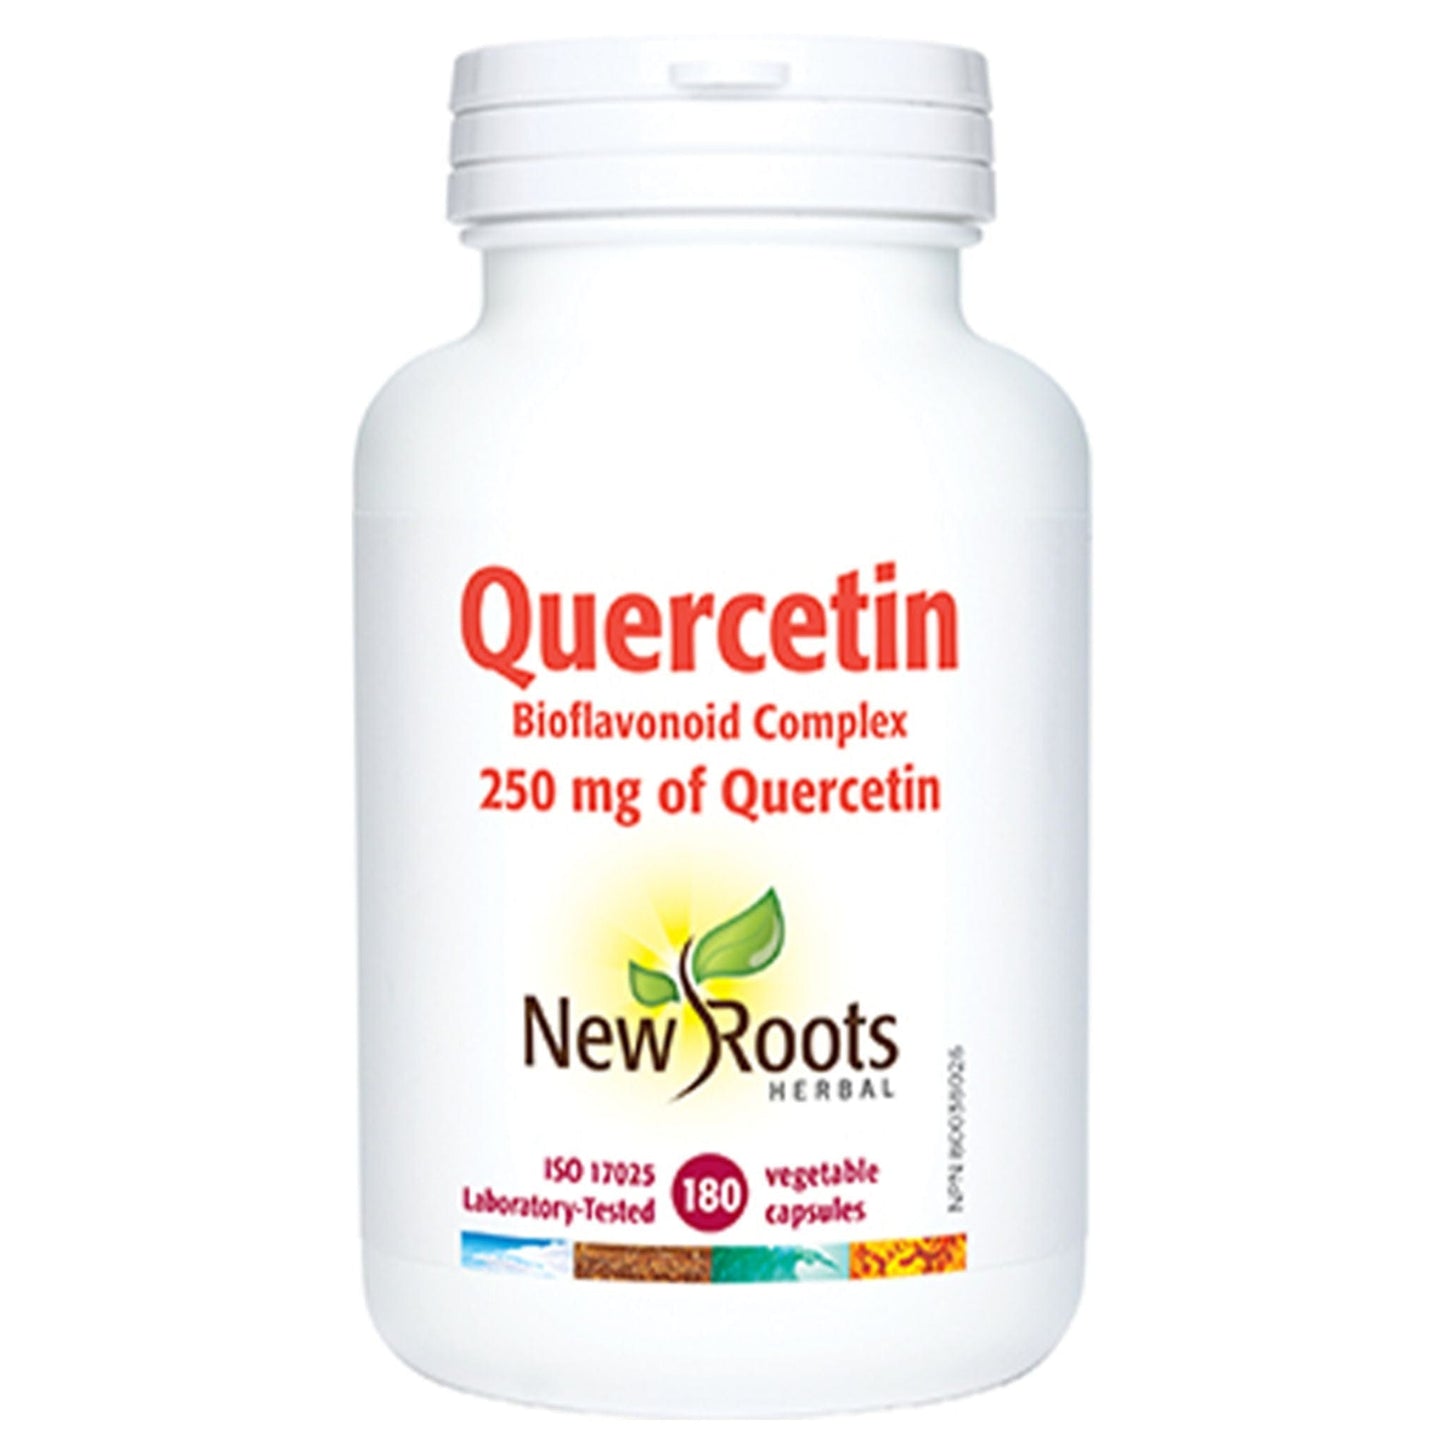 New Roots Quercetin Bioflavonoids Complex 600mg with 250mg of Quercetin